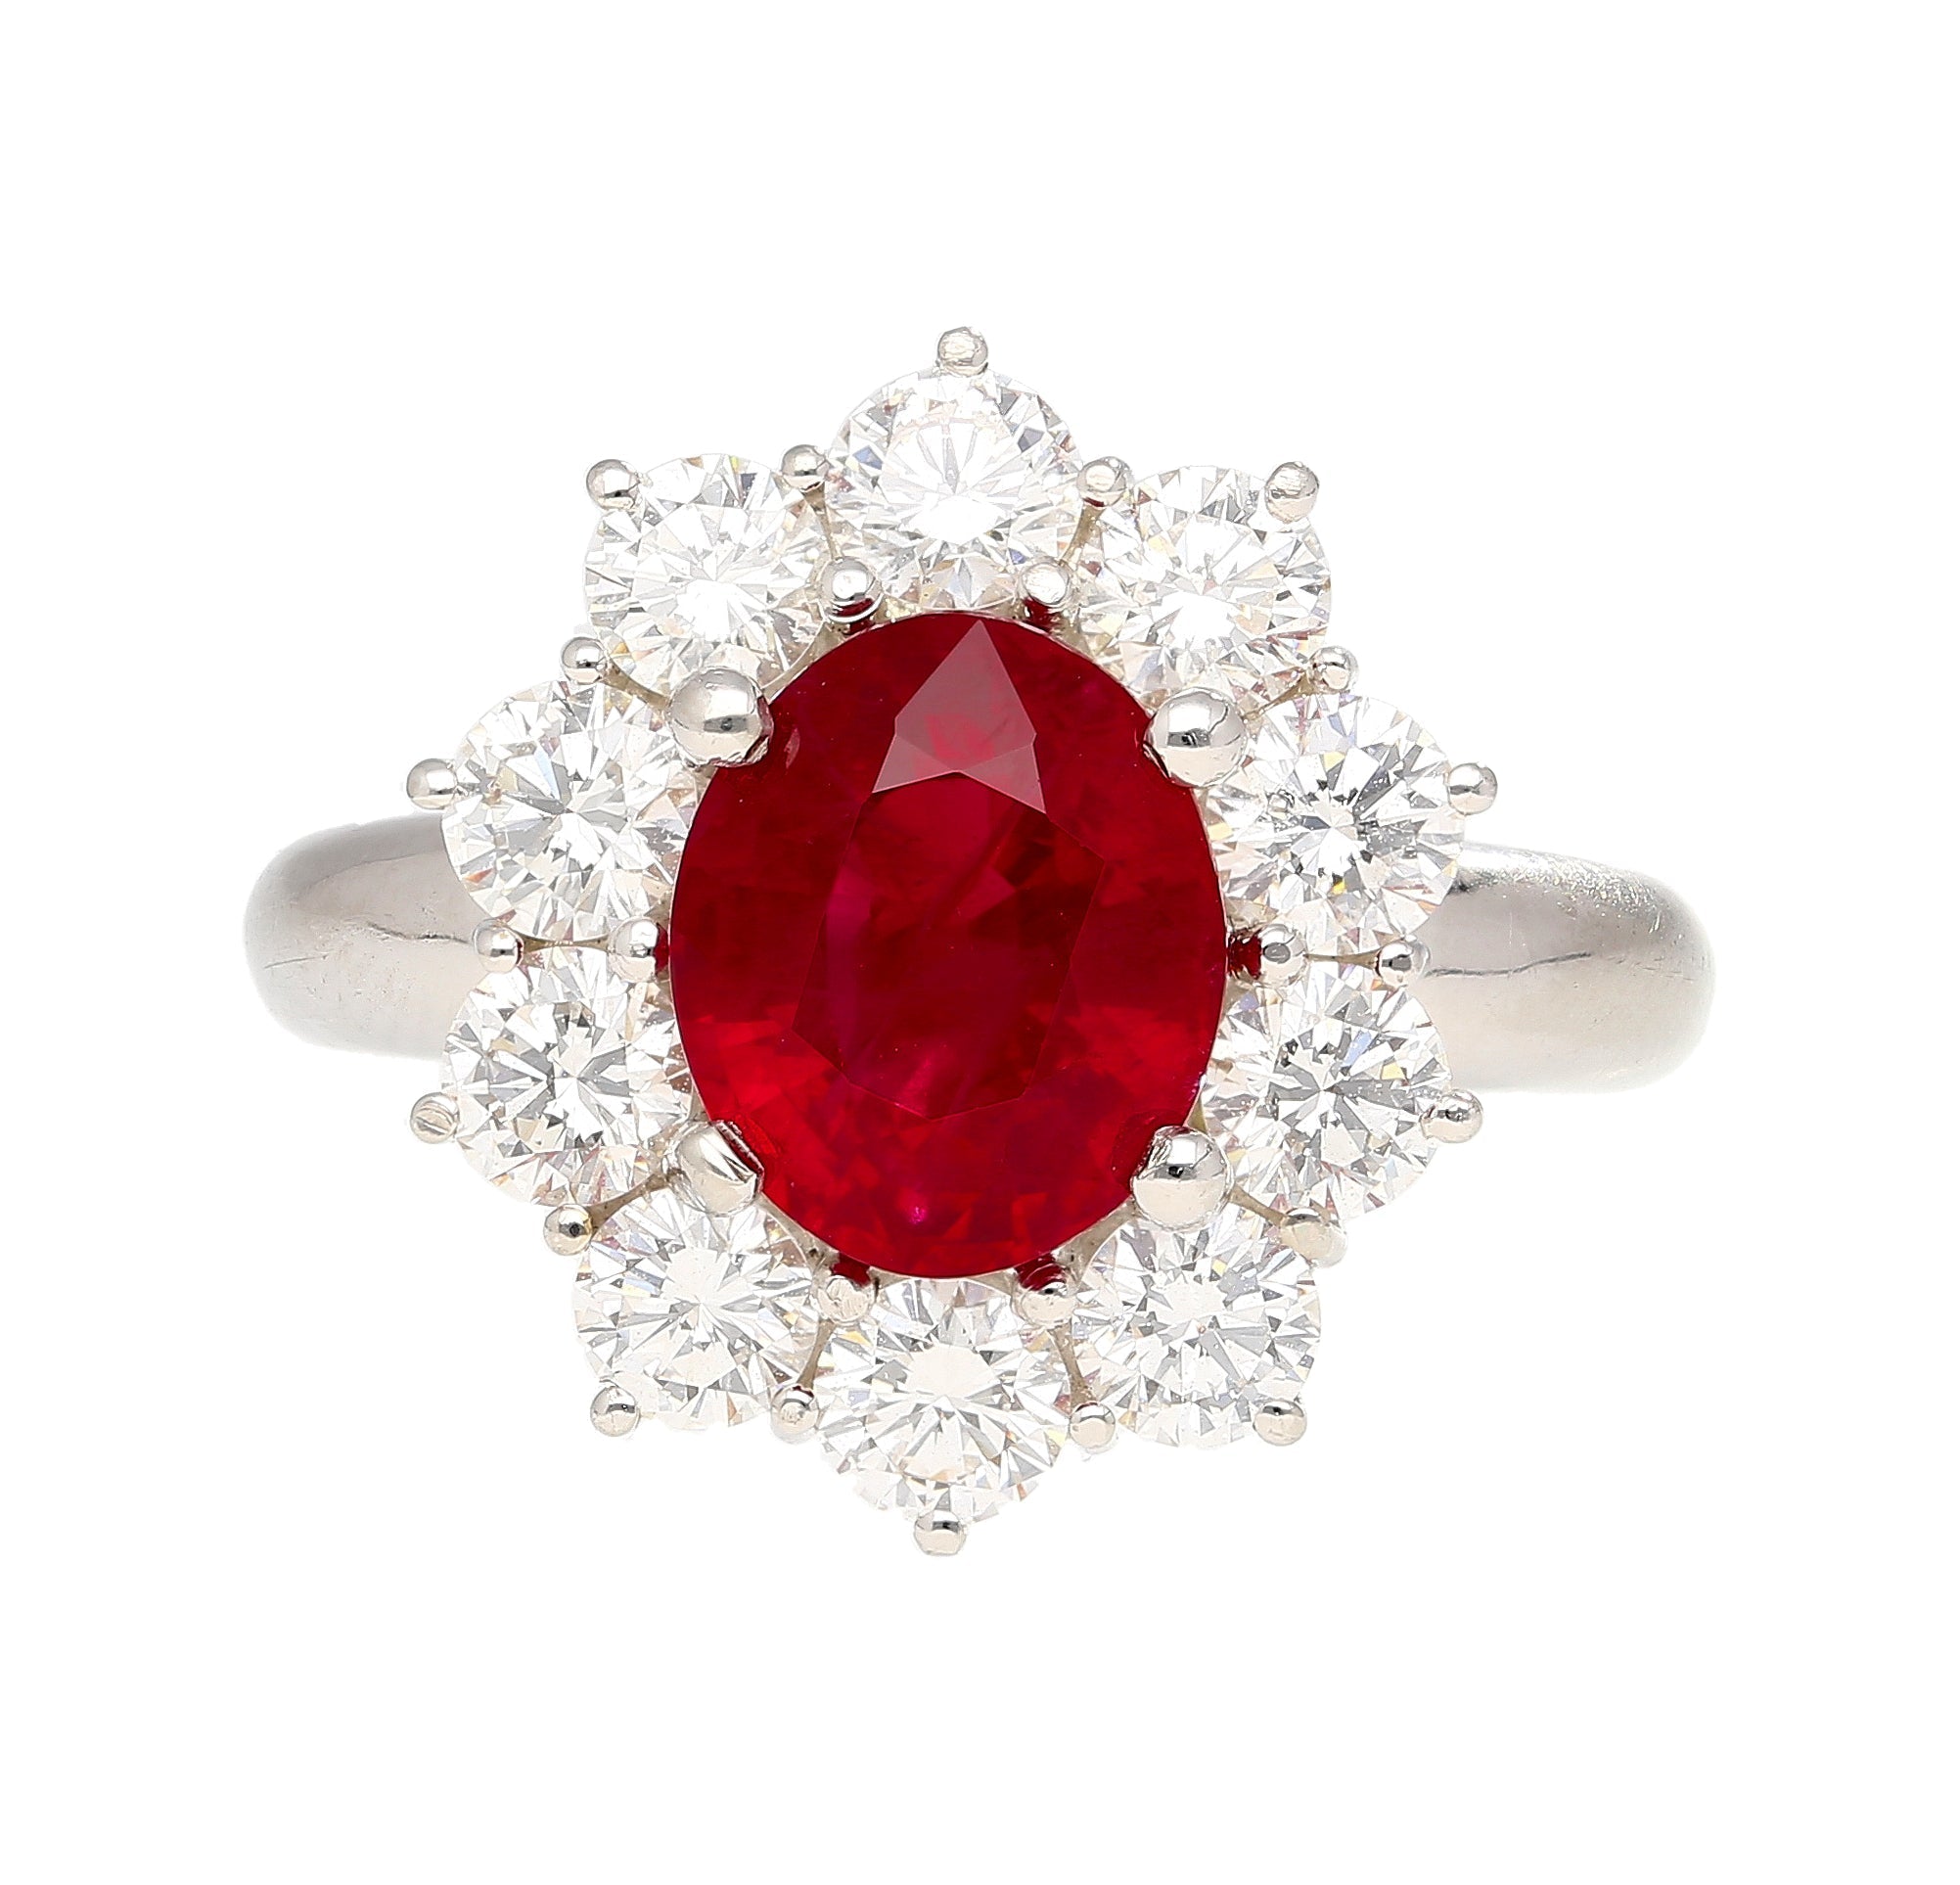 GRS-Certified-3-carat-Vivid-Red-Pigeon-Blood-Oval-Cut-Burma-Ruby-Ring-with-Diamond-Halo-Rings.jpg